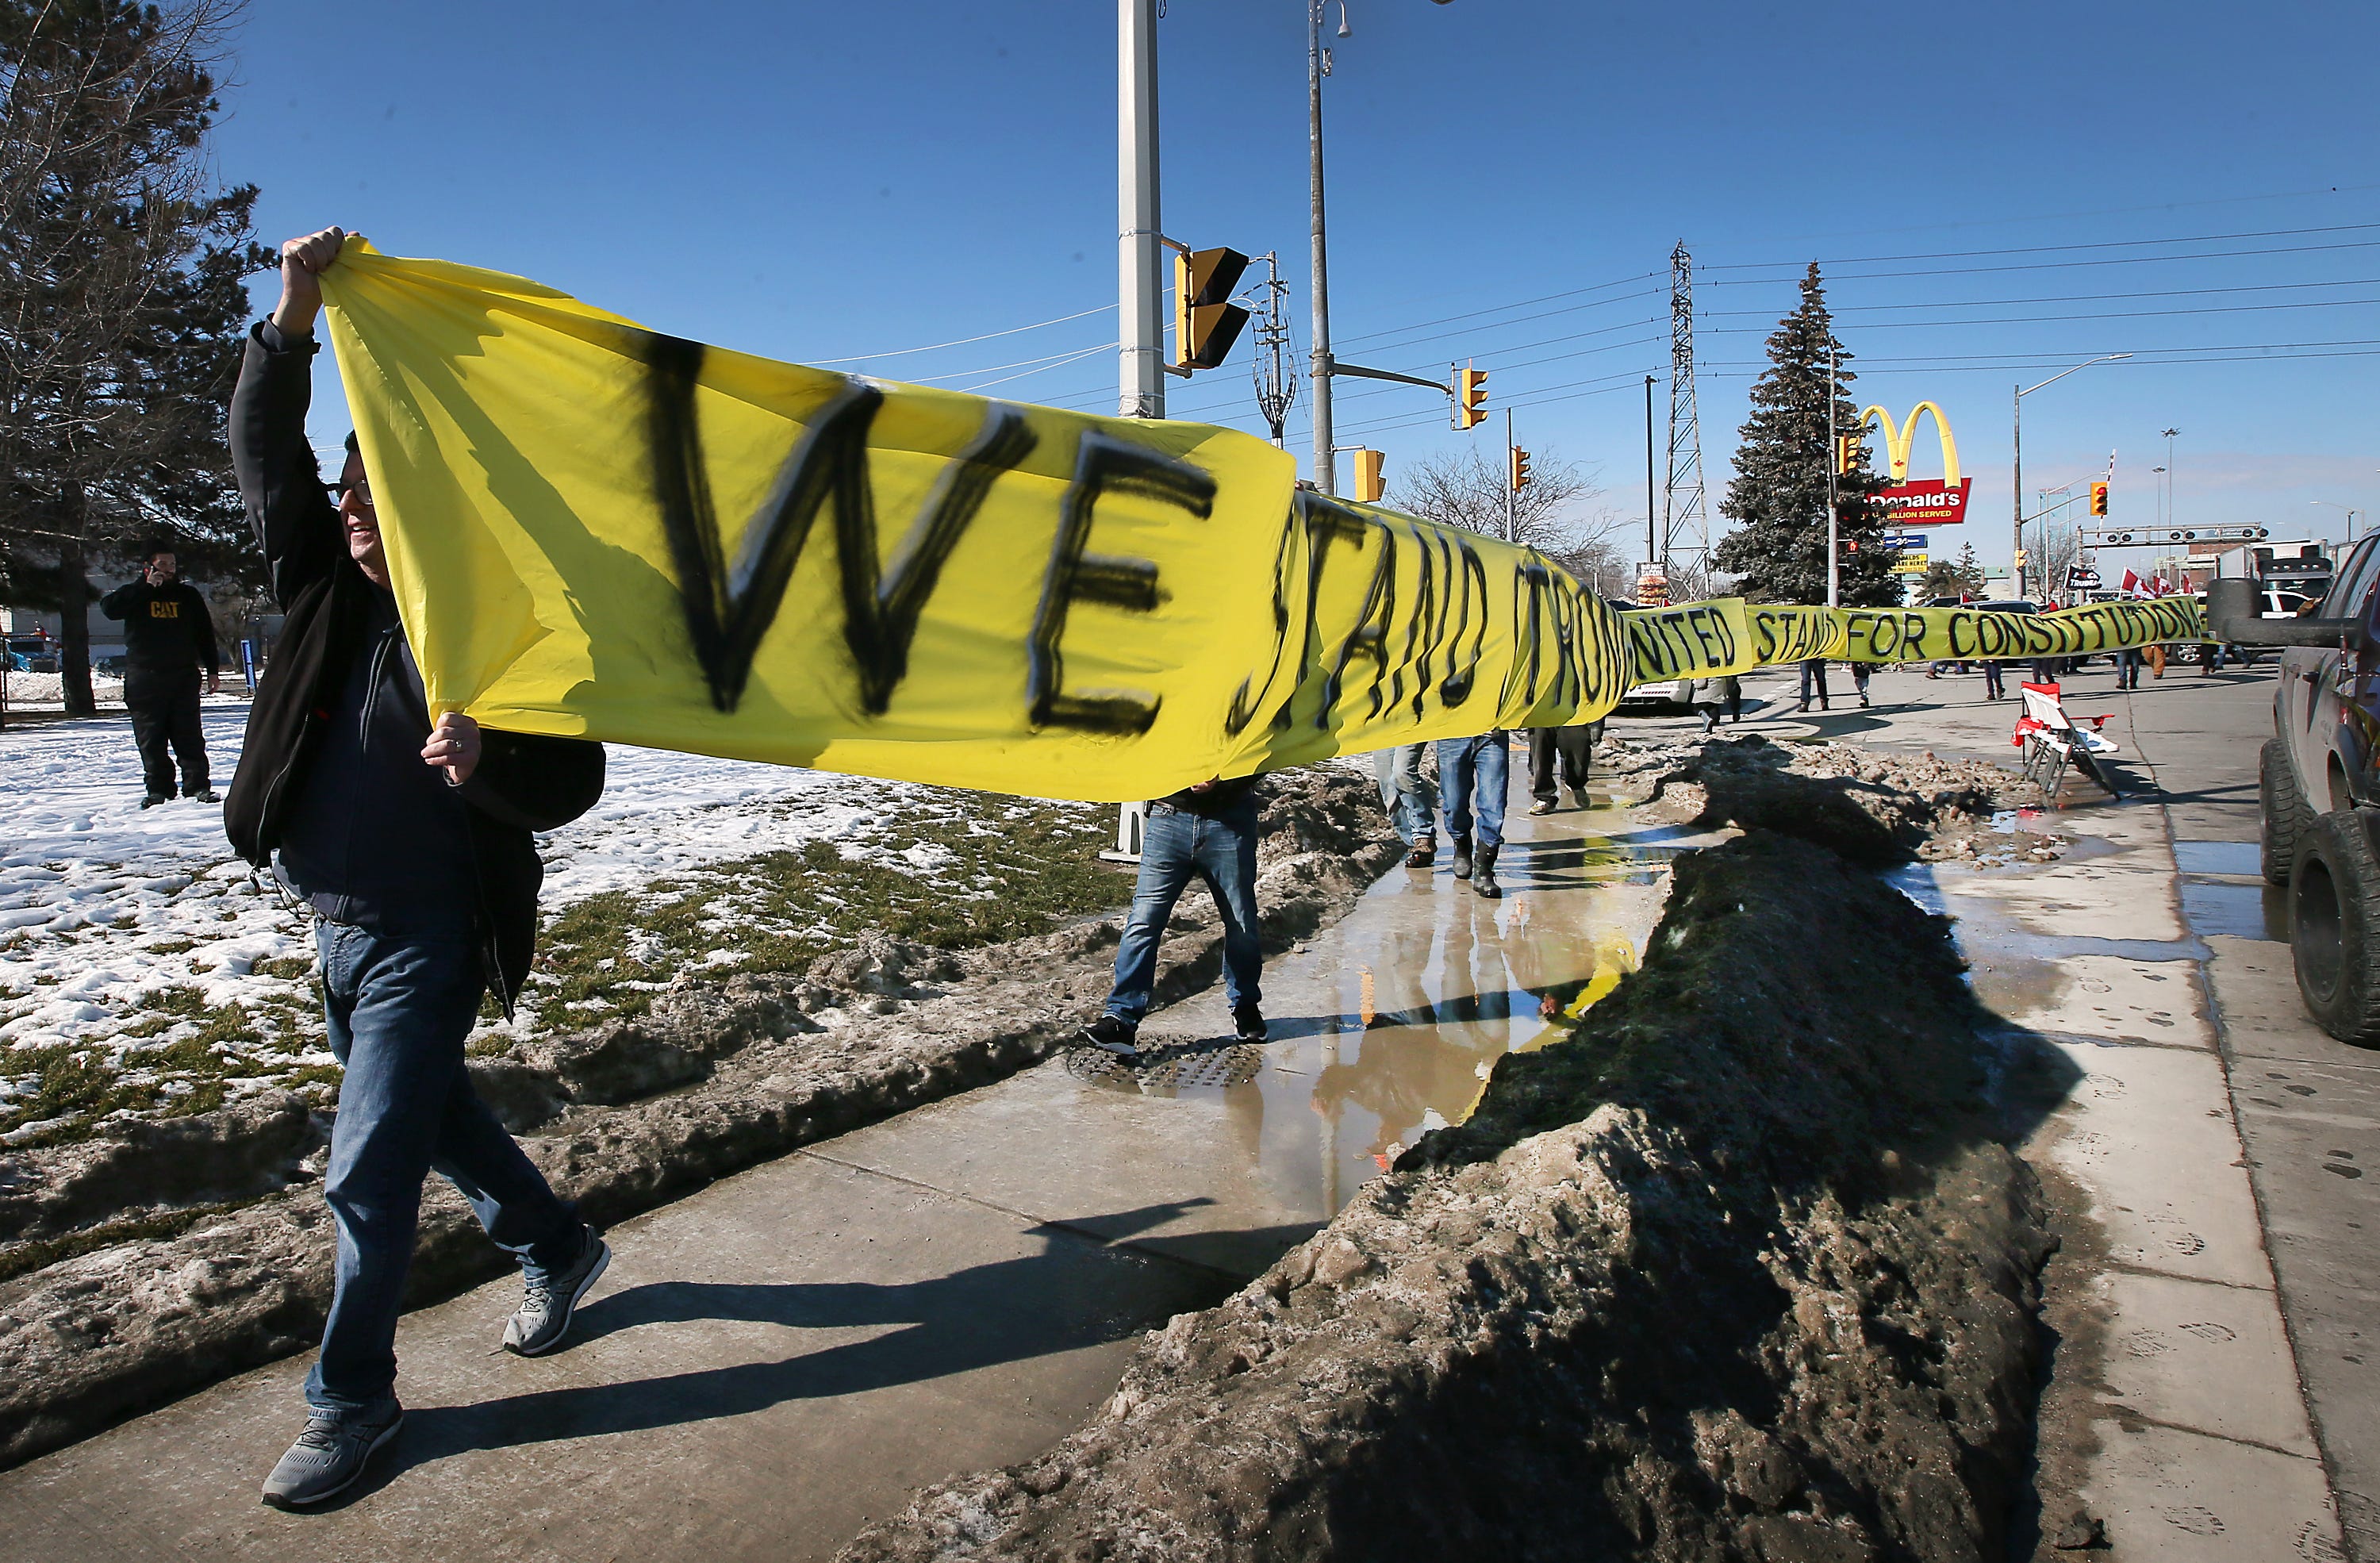 Anti vaccine mandate protestors march with a banner near the Ambassador Bridge in Windsor on Wednesday, February 9, 2022.